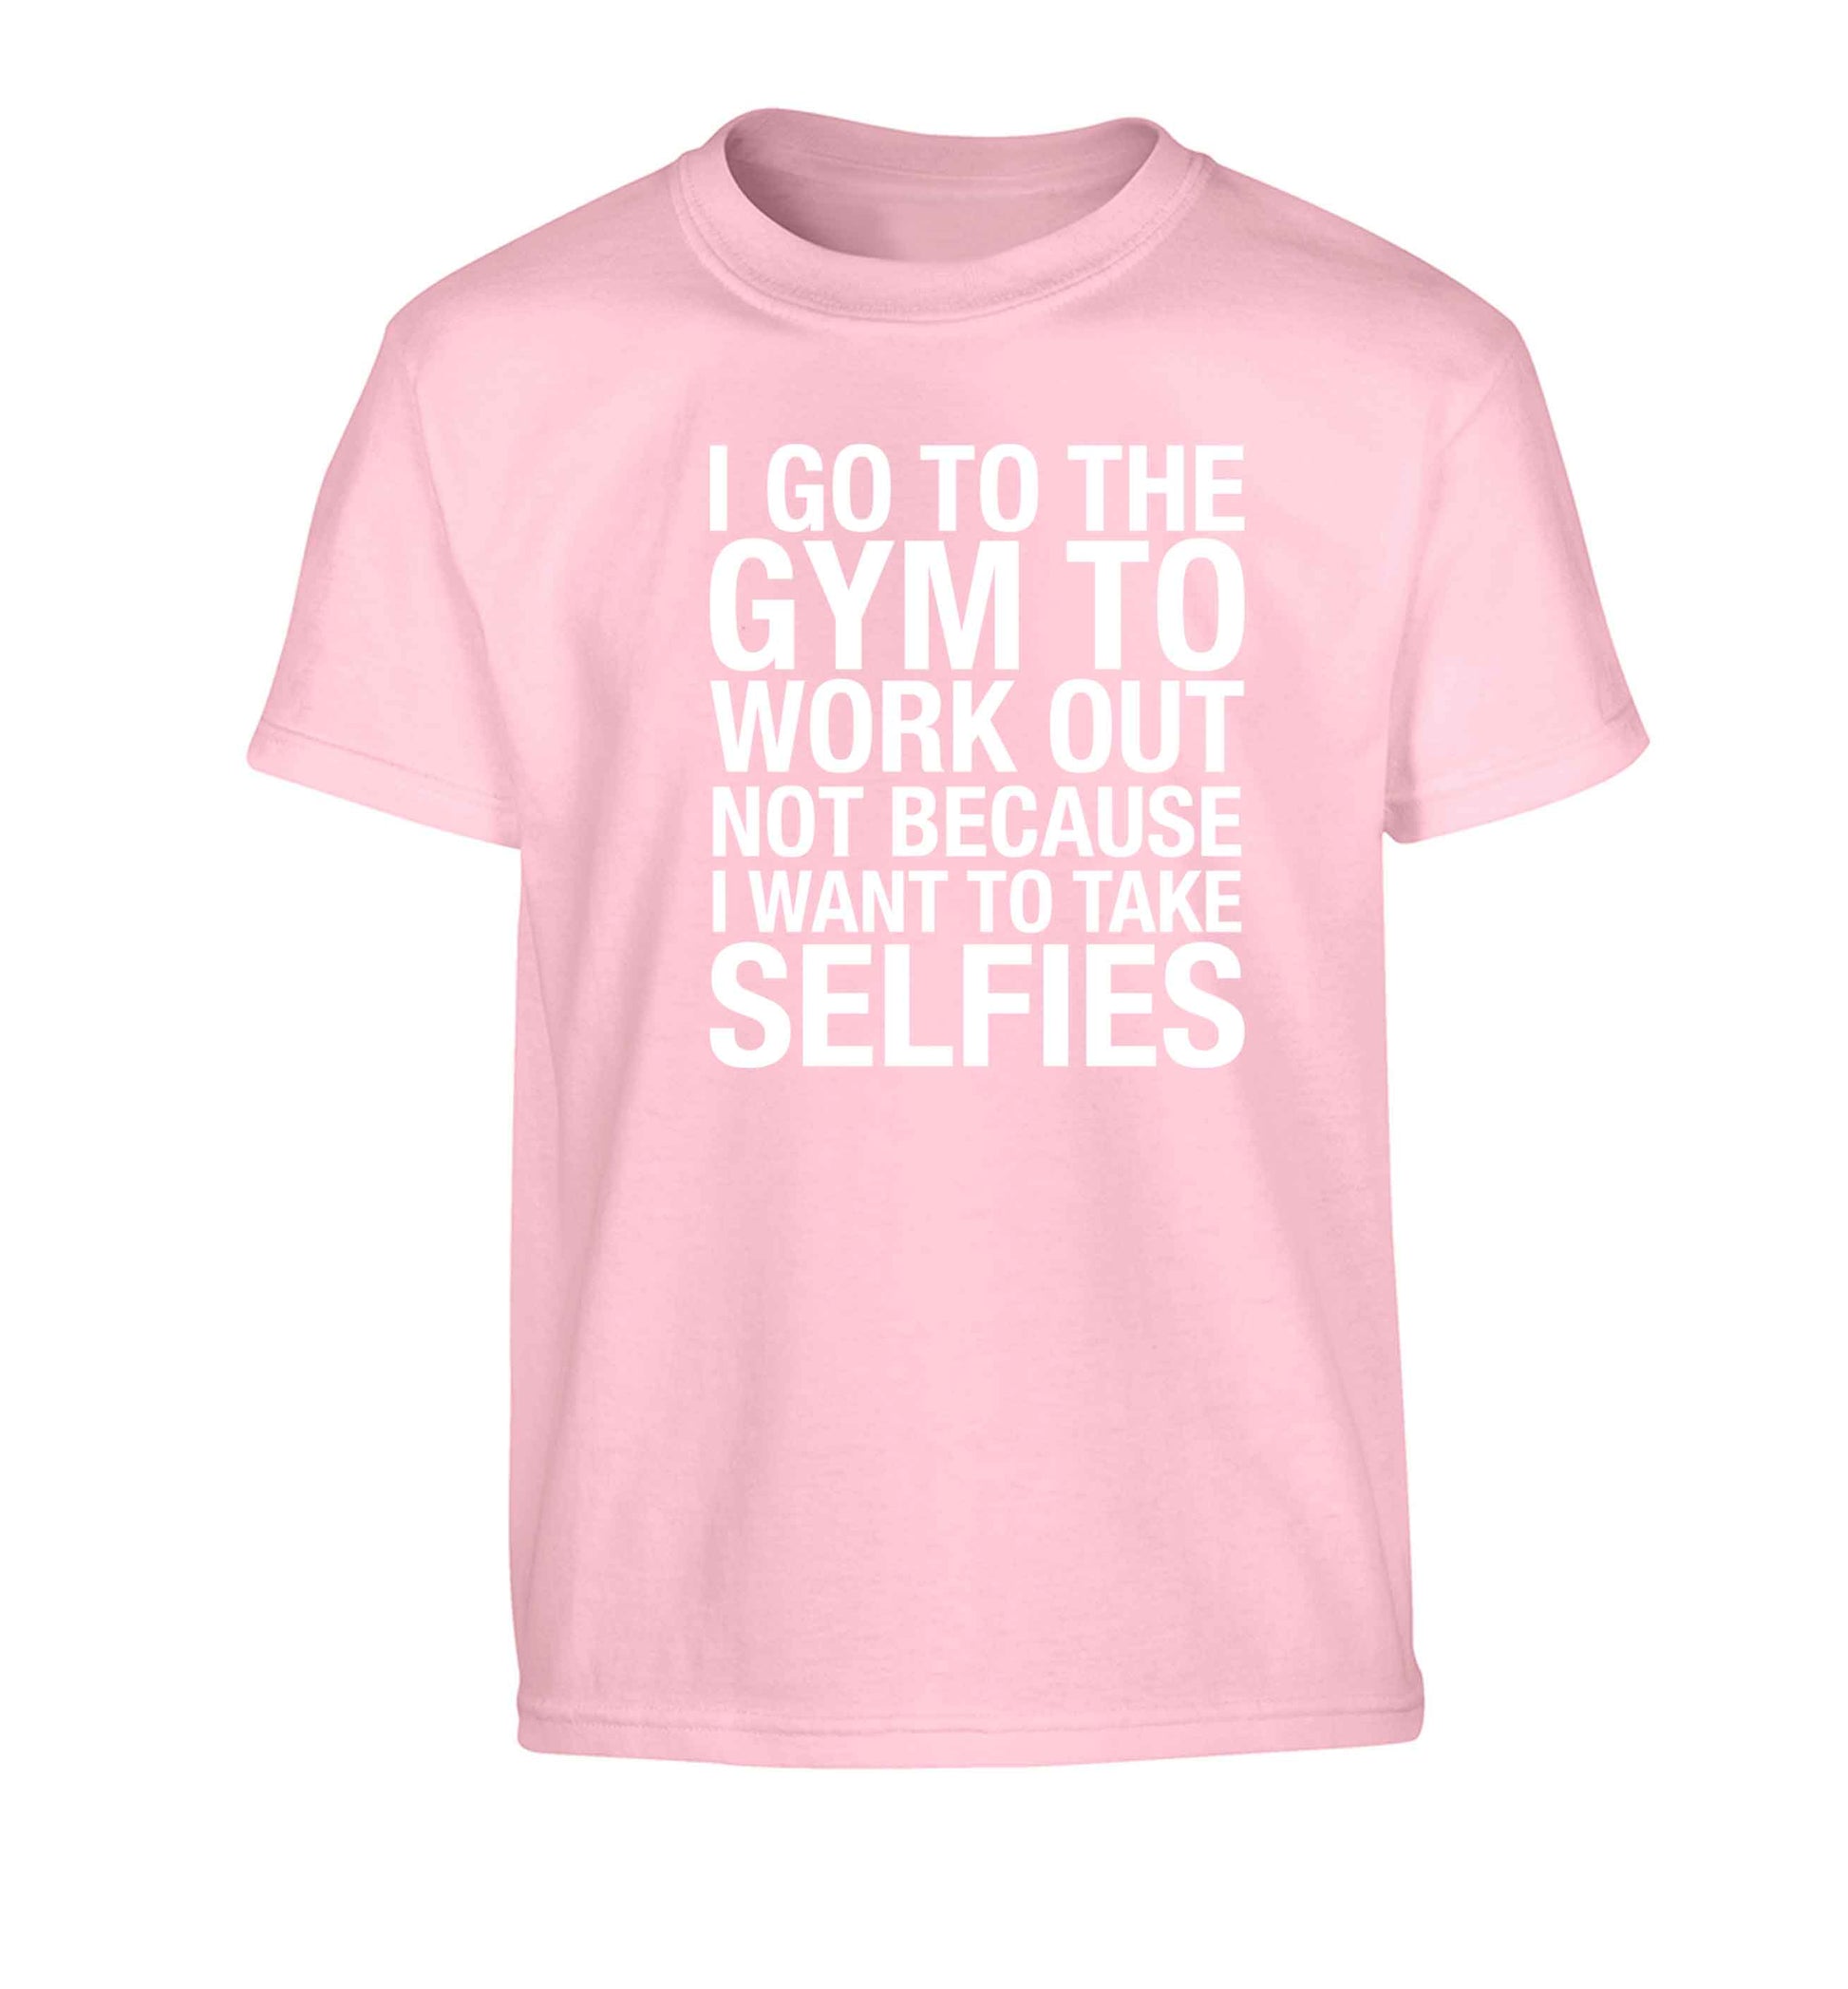 I go to the gym to workout not to take selfies Children's light pink Tshirt 12-13 Years